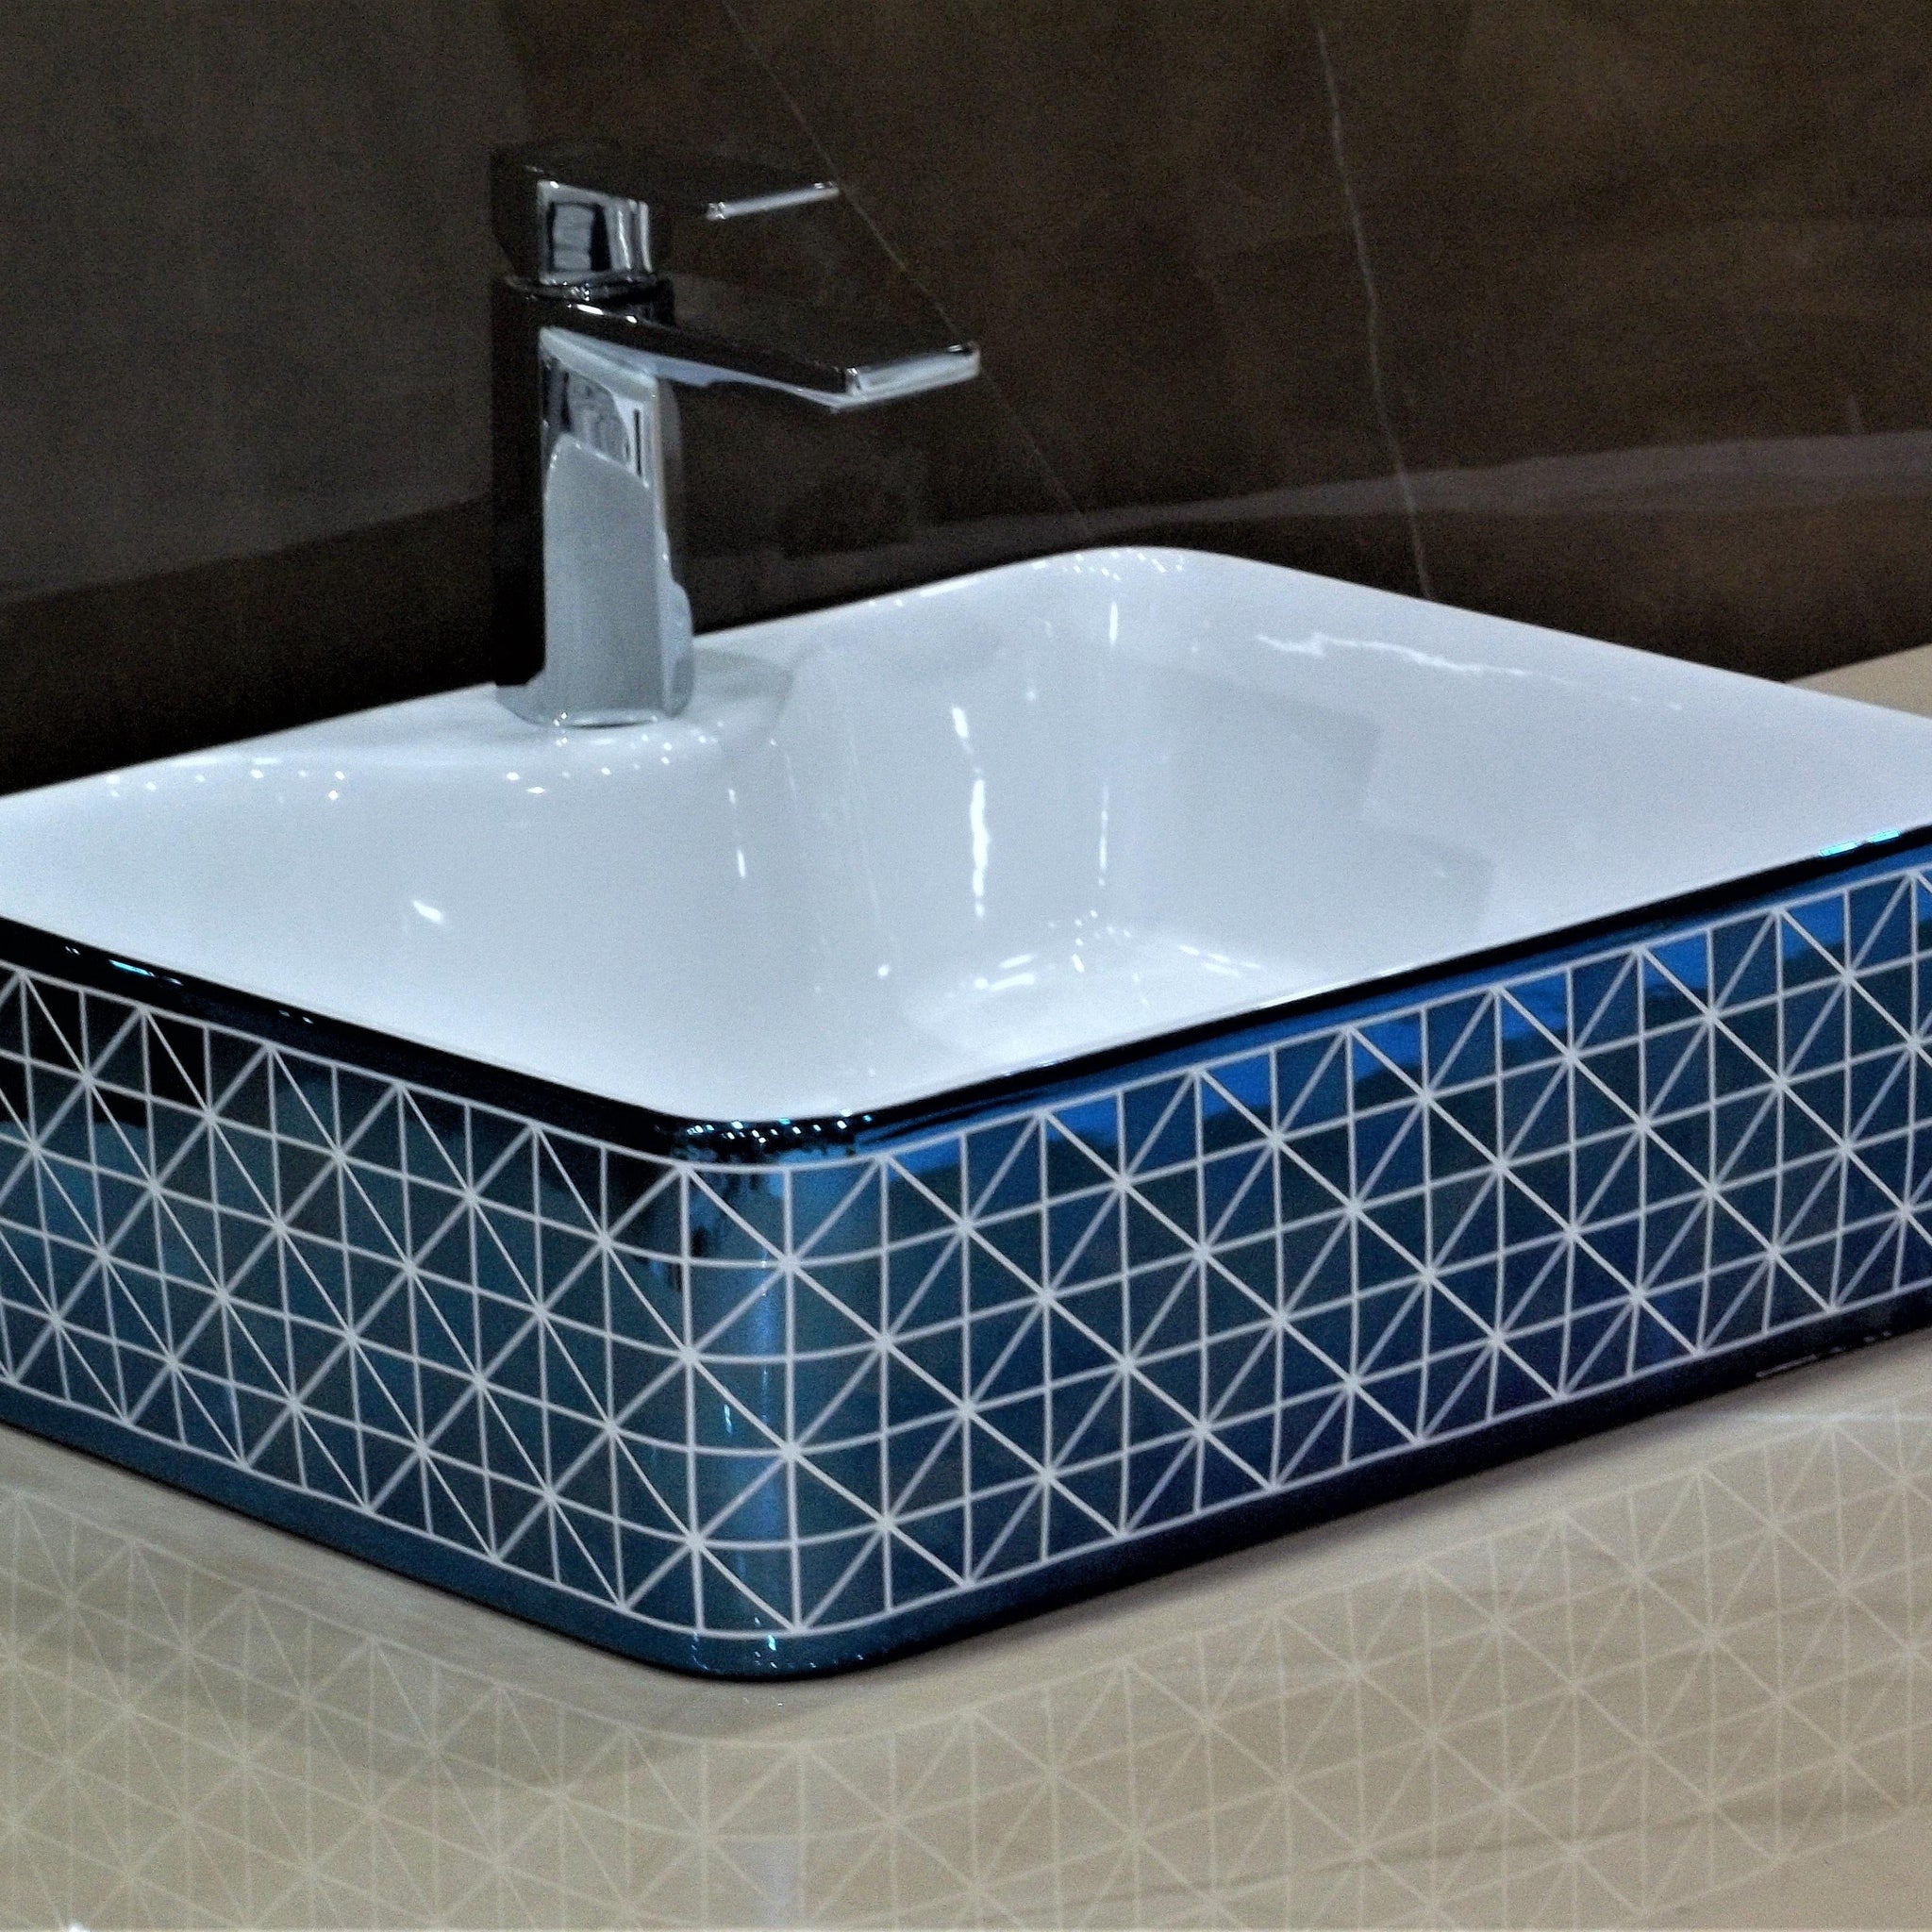 Ceramic Designer Table Top Over Counter Vessel Sink Wash Basin for Bathroom 19 X 15 X 5.5 Inch Blue White Glossy Finish - Bath Outlet